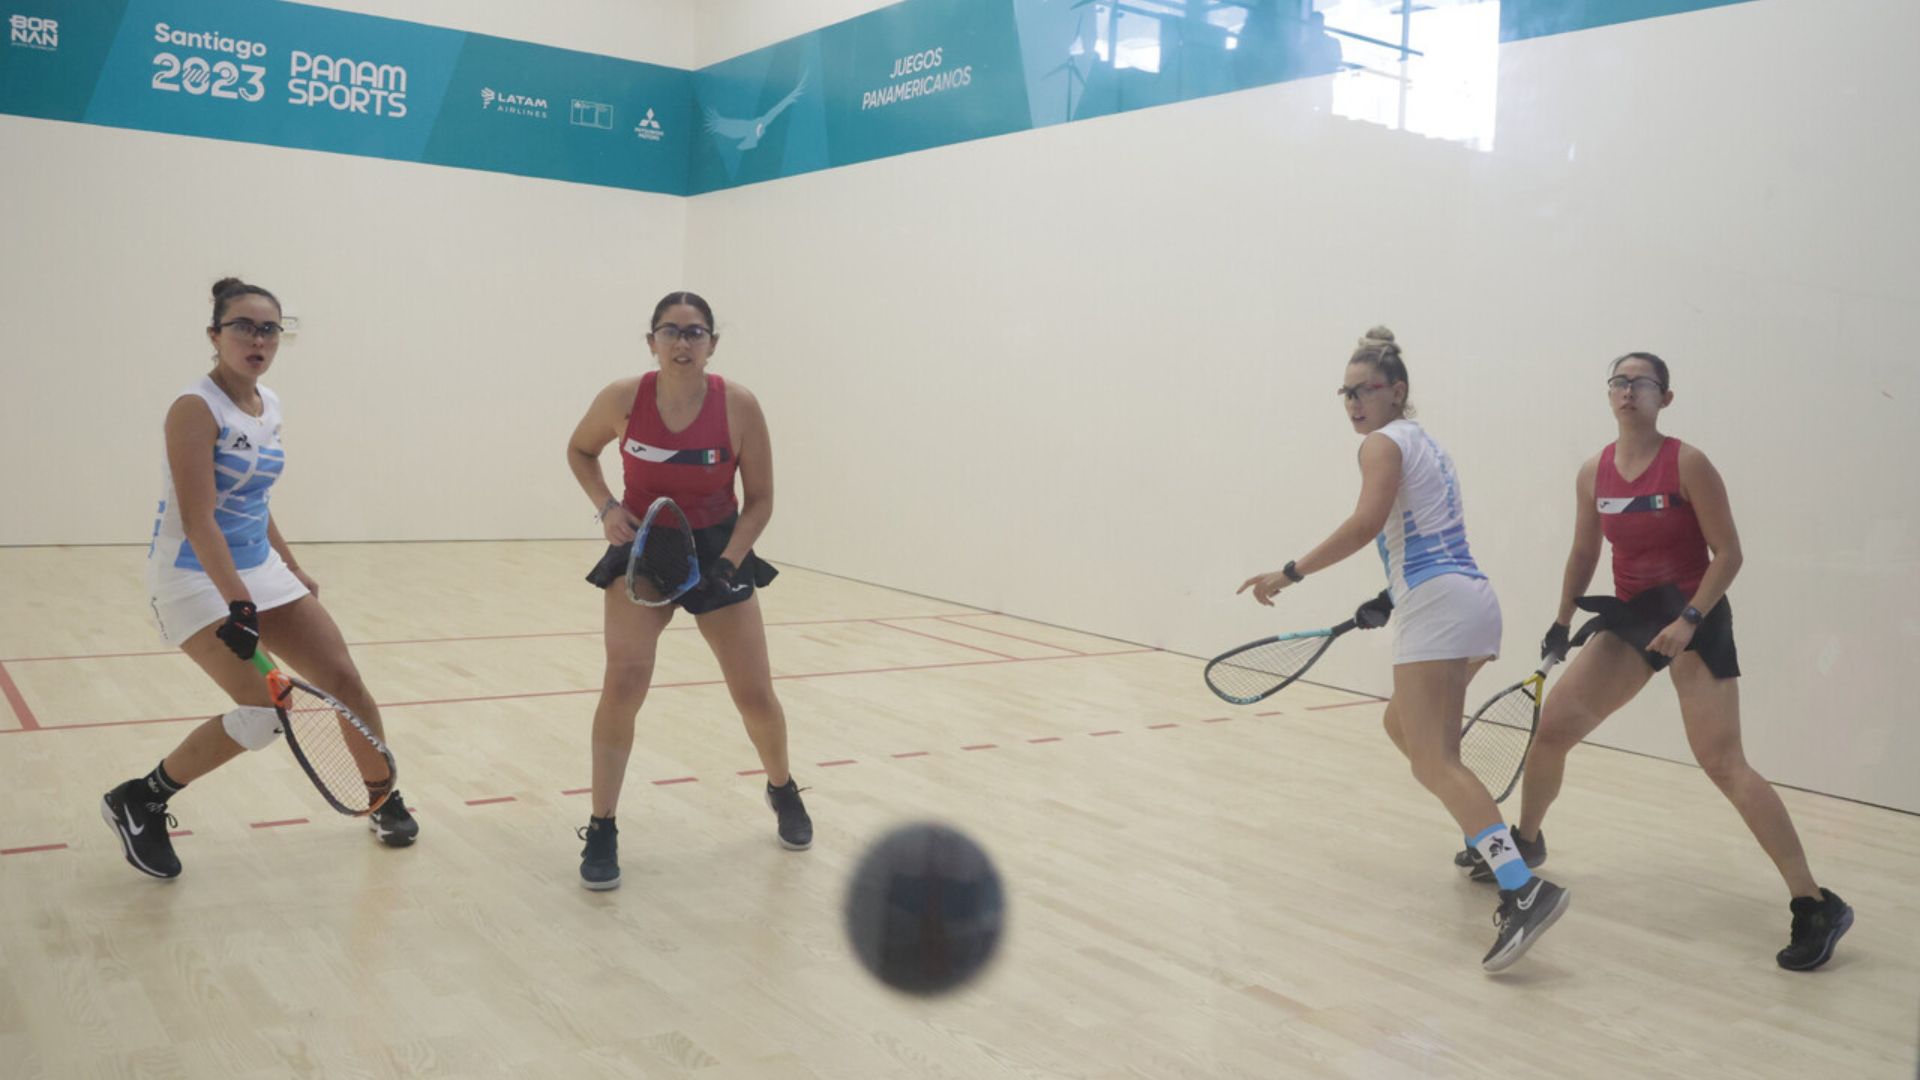 Argentina and the Independent Athletes Team are go for gold in racquetball